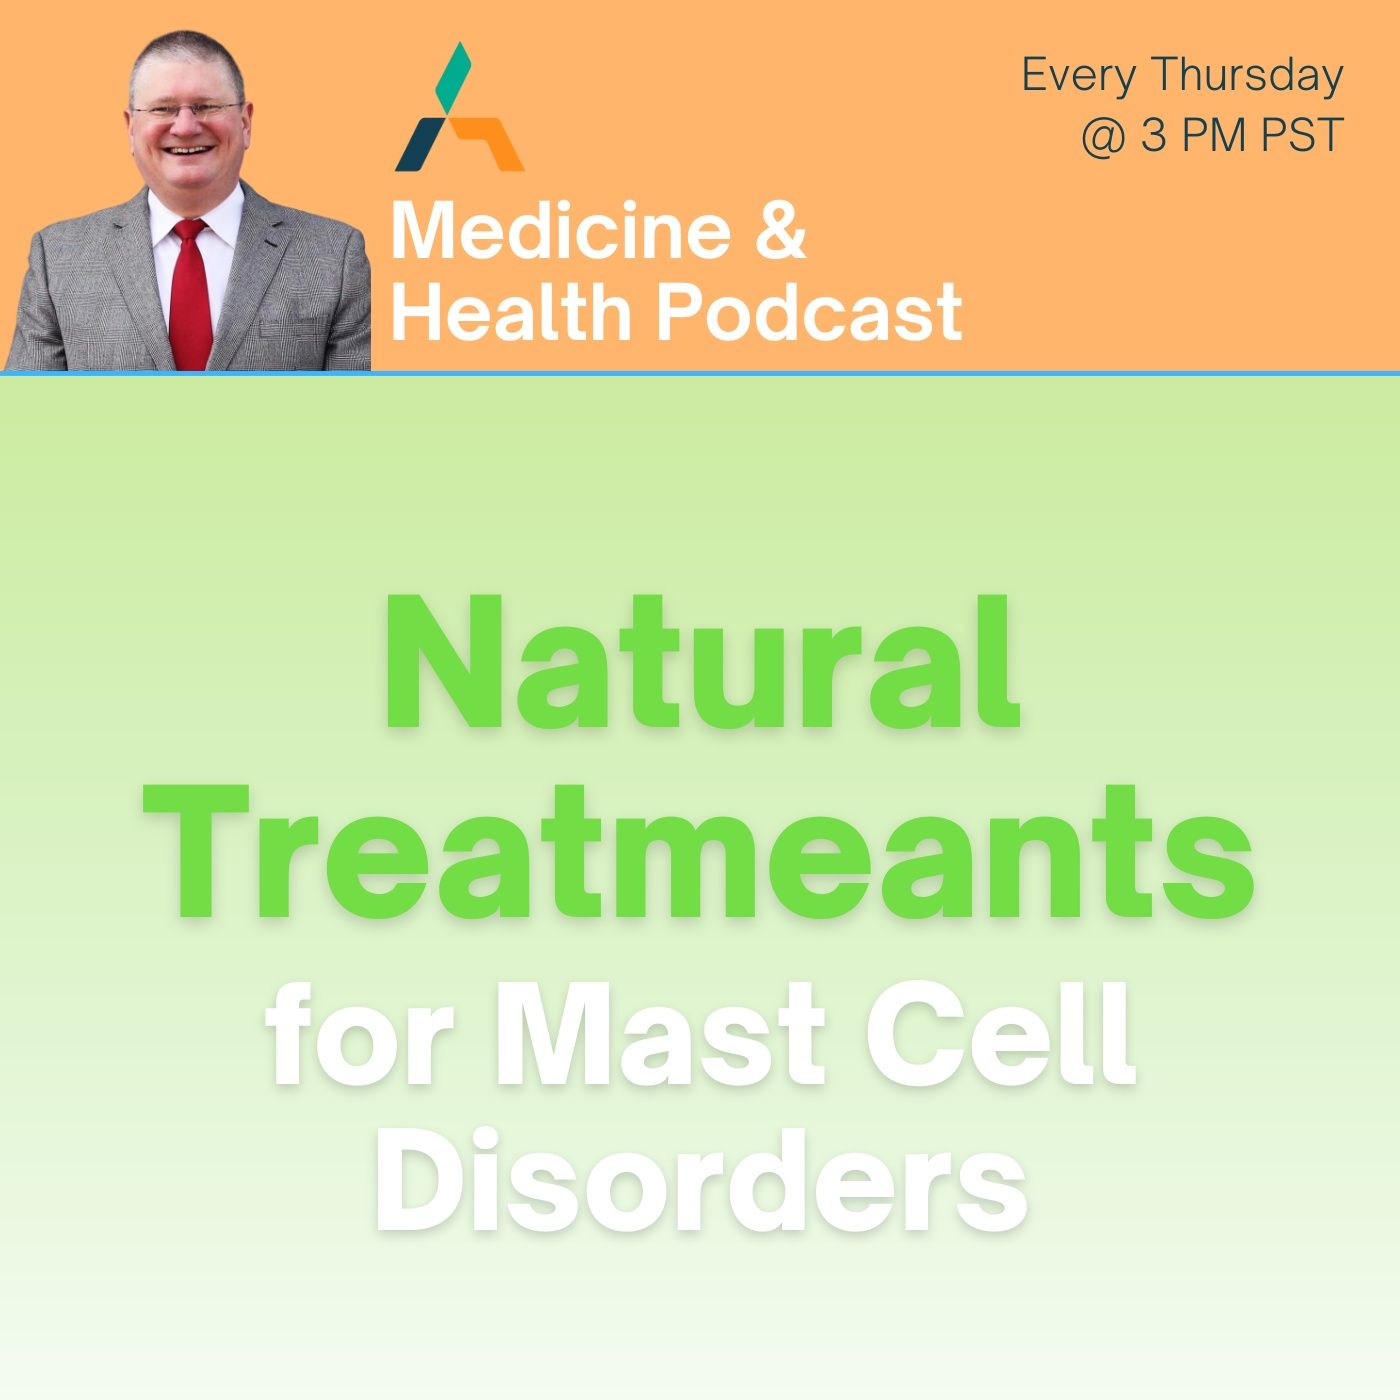 NATURAL TREATMENTS FOR MAST CELL DISORDERS